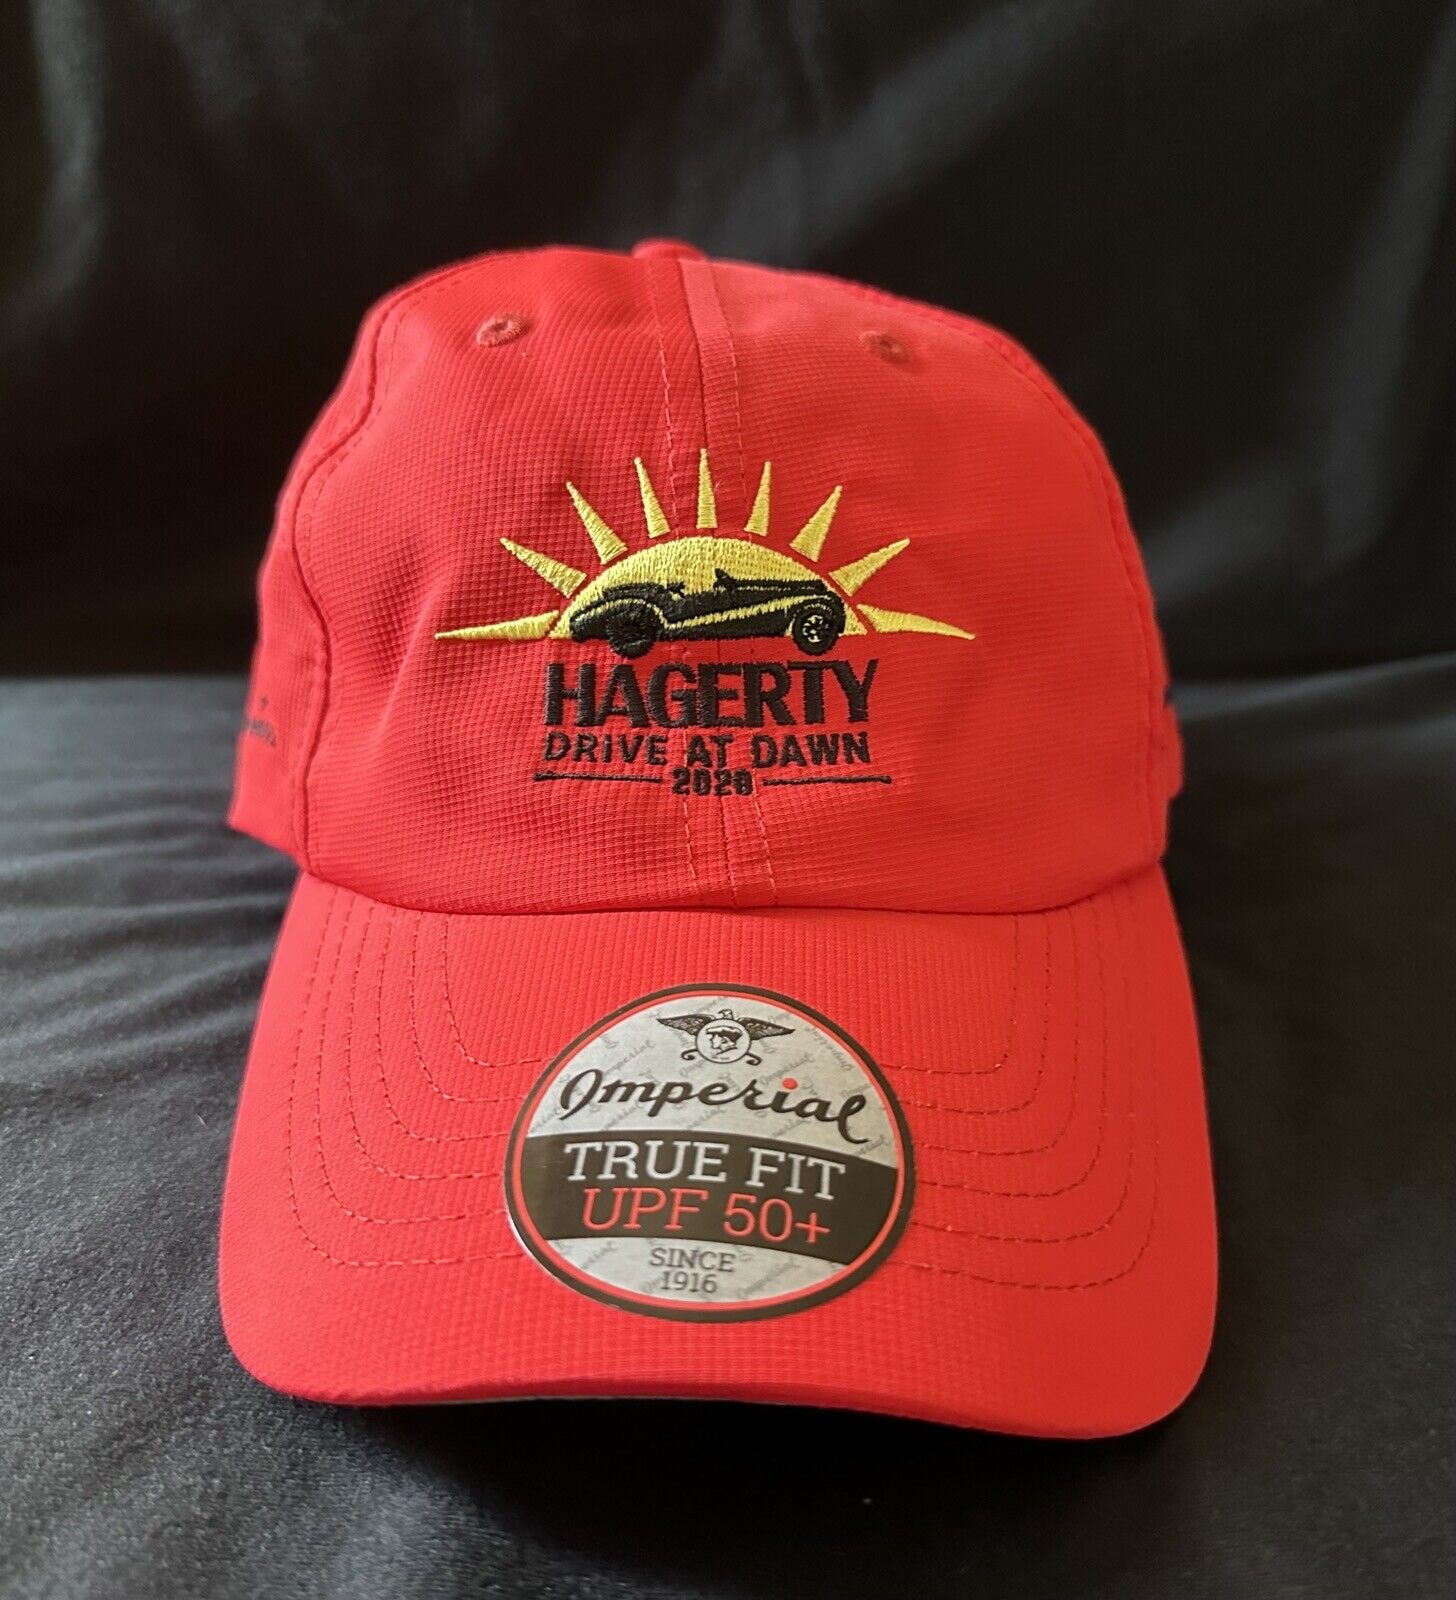 NEW 2020 DAWN PATROL Hat Cap Hagerty Canceled Pebble Beach Concours 